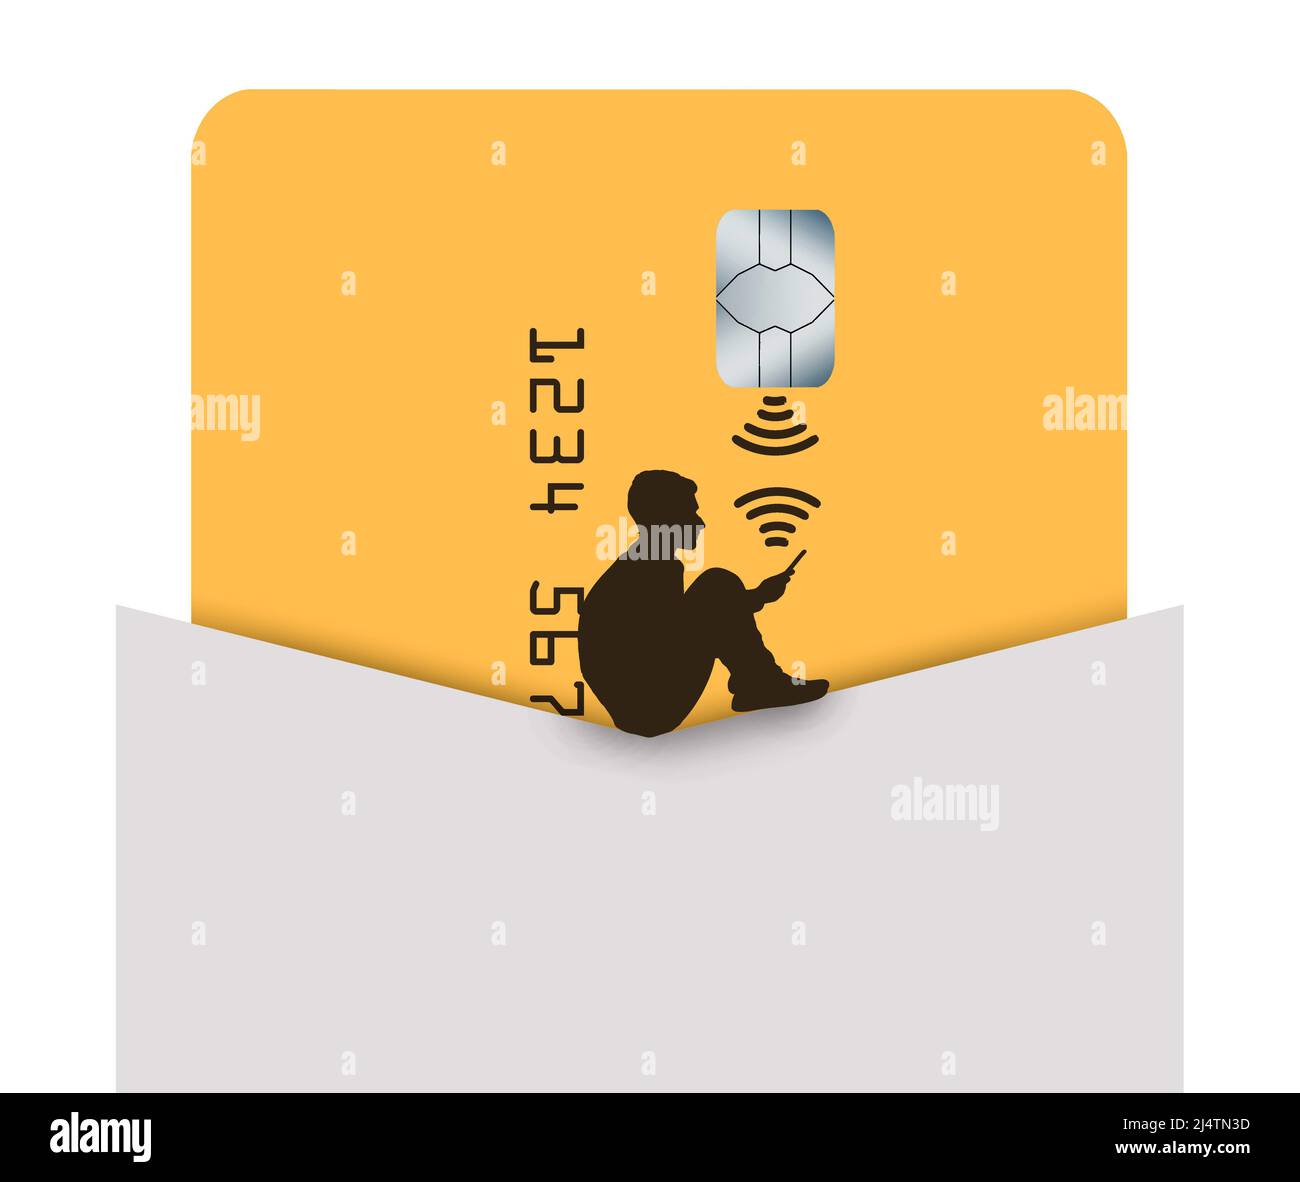 Near Field Communication is being used as a young man sits near his credit card with his cell phone in a 3-d illustration. Stock Photo